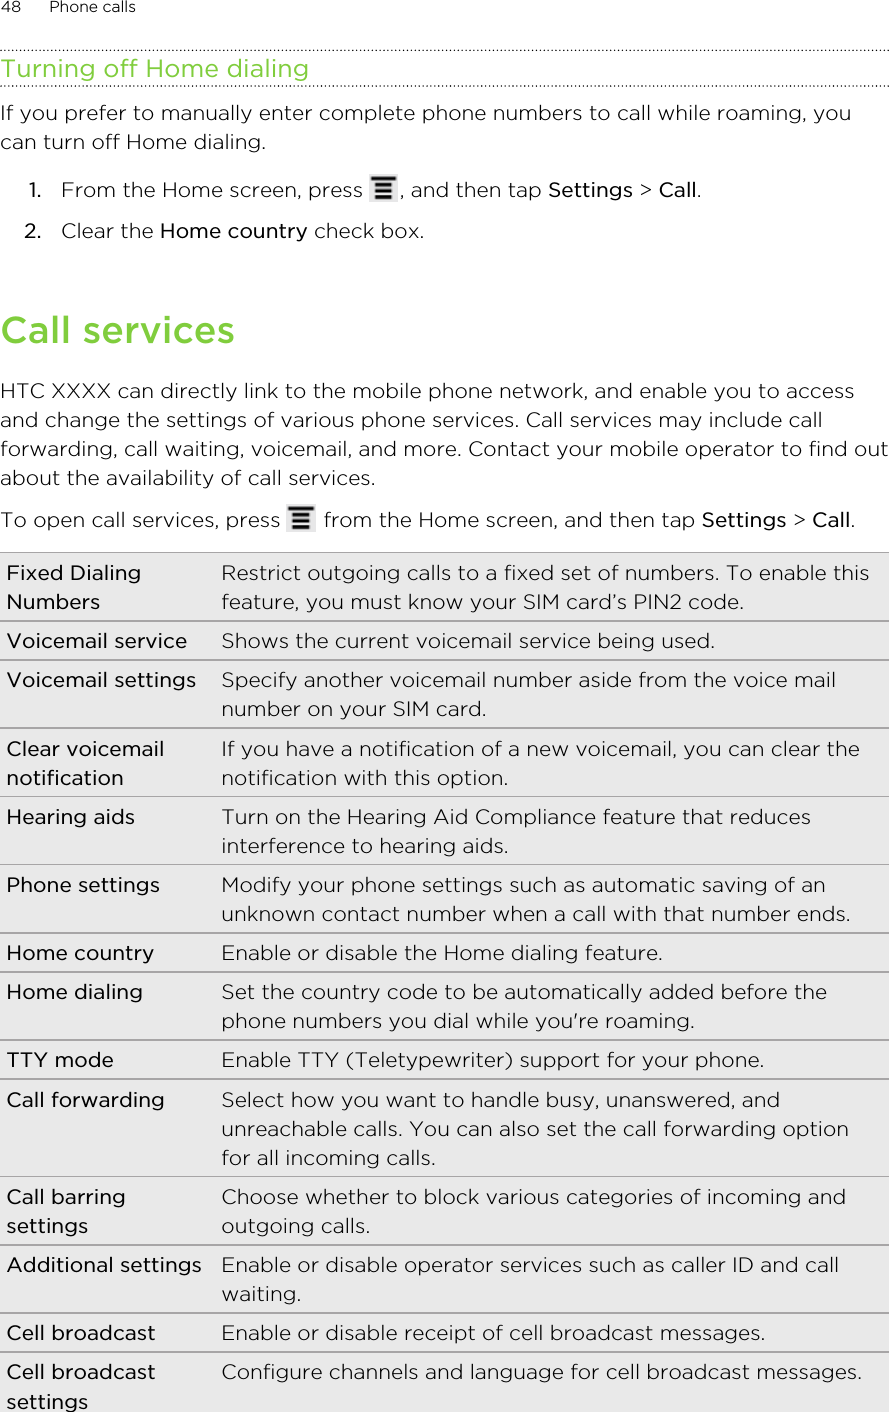 Turning off Home dialingIf you prefer to manually enter complete phone numbers to call while roaming, youcan turn off Home dialing.1. From the Home screen, press  , and then tap Settings &gt; Call.2. Clear the Home country check box.Call servicesHTC XXXX can directly link to the mobile phone network, and enable you to accessand change the settings of various phone services. Call services may include callforwarding, call waiting, voicemail, and more. Contact your mobile operator to find outabout the availability of call services.To open call services, press   from the Home screen, and then tap Settings &gt; Call.Fixed DialingNumbersRestrict outgoing calls to a fixed set of numbers. To enable thisfeature, you must know your SIM card’s PIN2 code.Voicemail service Shows the current voicemail service being used.Voicemail settings Specify another voicemail number aside from the voice mailnumber on your SIM card.Clear voicemailnotificationIf you have a notification of a new voicemail, you can clear thenotification with this option.Hearing aids Turn on the Hearing Aid Compliance feature that reducesinterference to hearing aids.Phone settings Modify your phone settings such as automatic saving of anunknown contact number when a call with that number ends.Home country Enable or disable the Home dialing feature.Home dialing Set the country code to be automatically added before thephone numbers you dial while you&apos;re roaming.TTY mode Enable TTY (Teletypewriter) support for your phone.Call forwarding Select how you want to handle busy, unanswered, andunreachable calls. You can also set the call forwarding optionfor all incoming calls.Call barringsettingsChoose whether to block various categories of incoming andoutgoing calls.Additional settings Enable or disable operator services such as caller ID and callwaiting.Cell broadcast Enable or disable receipt of cell broadcast messages.Cell broadcastsettingsConfigure channels and language for cell broadcast messages.48 Phone calls